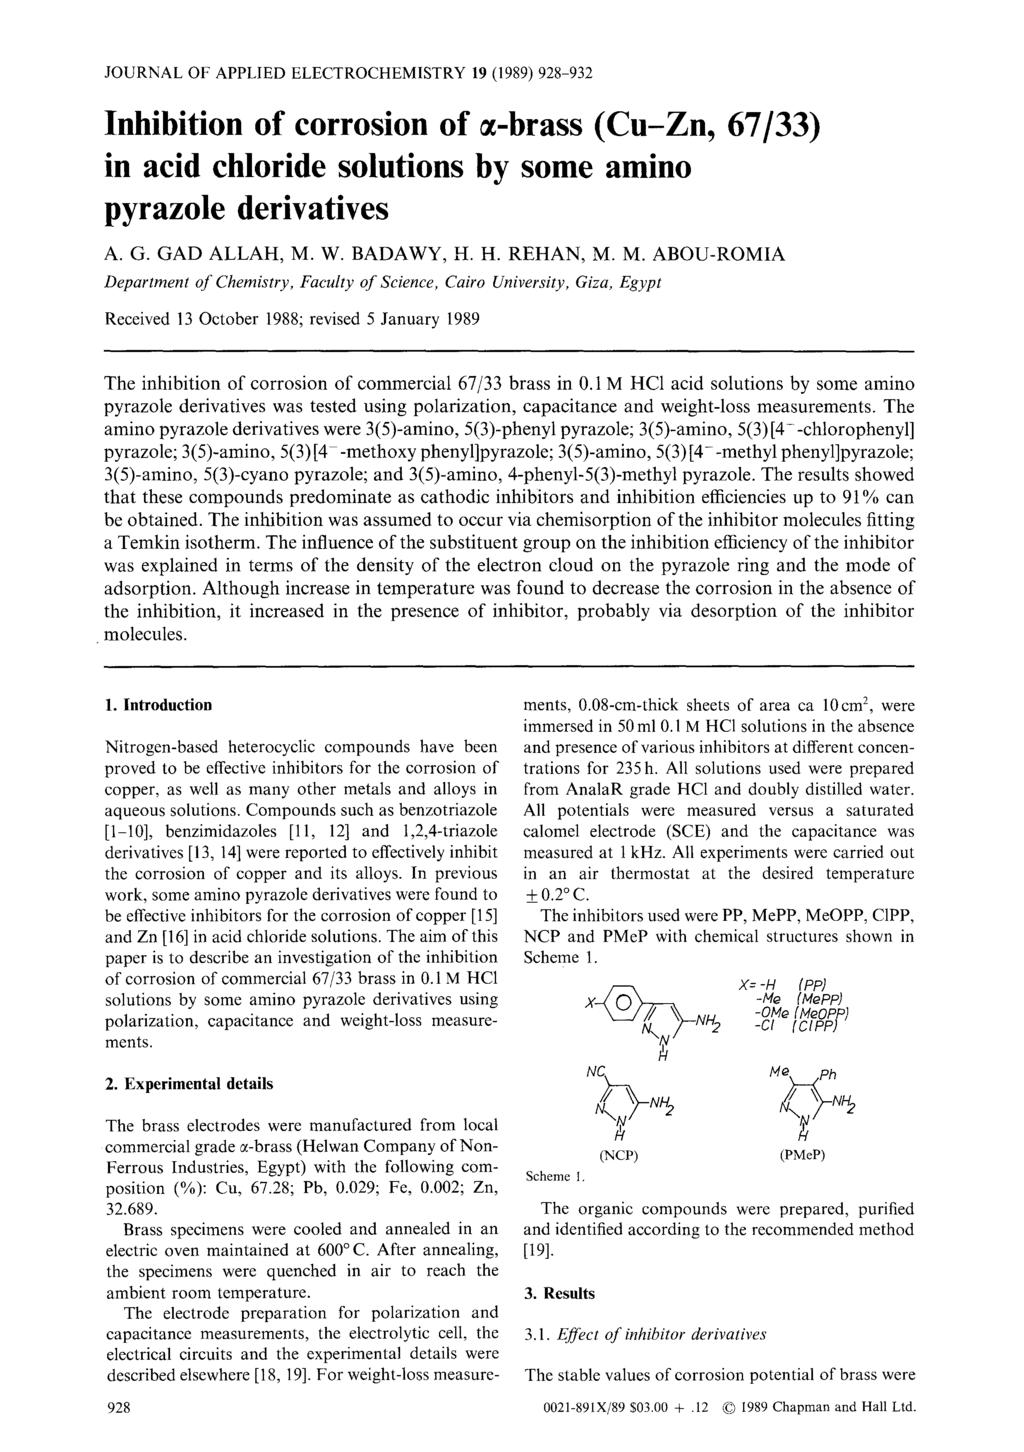 JOURNAL OF APPLIED ELECTROCHEMISTRY 19 (1989) 928-932 Inhibition of corrosion of -brass (Cu-Zn, 6733) in acid chloride solutions by some amino pyrazole derivatives A. G. GAD ALLAH, M. W. BADAWY, H.